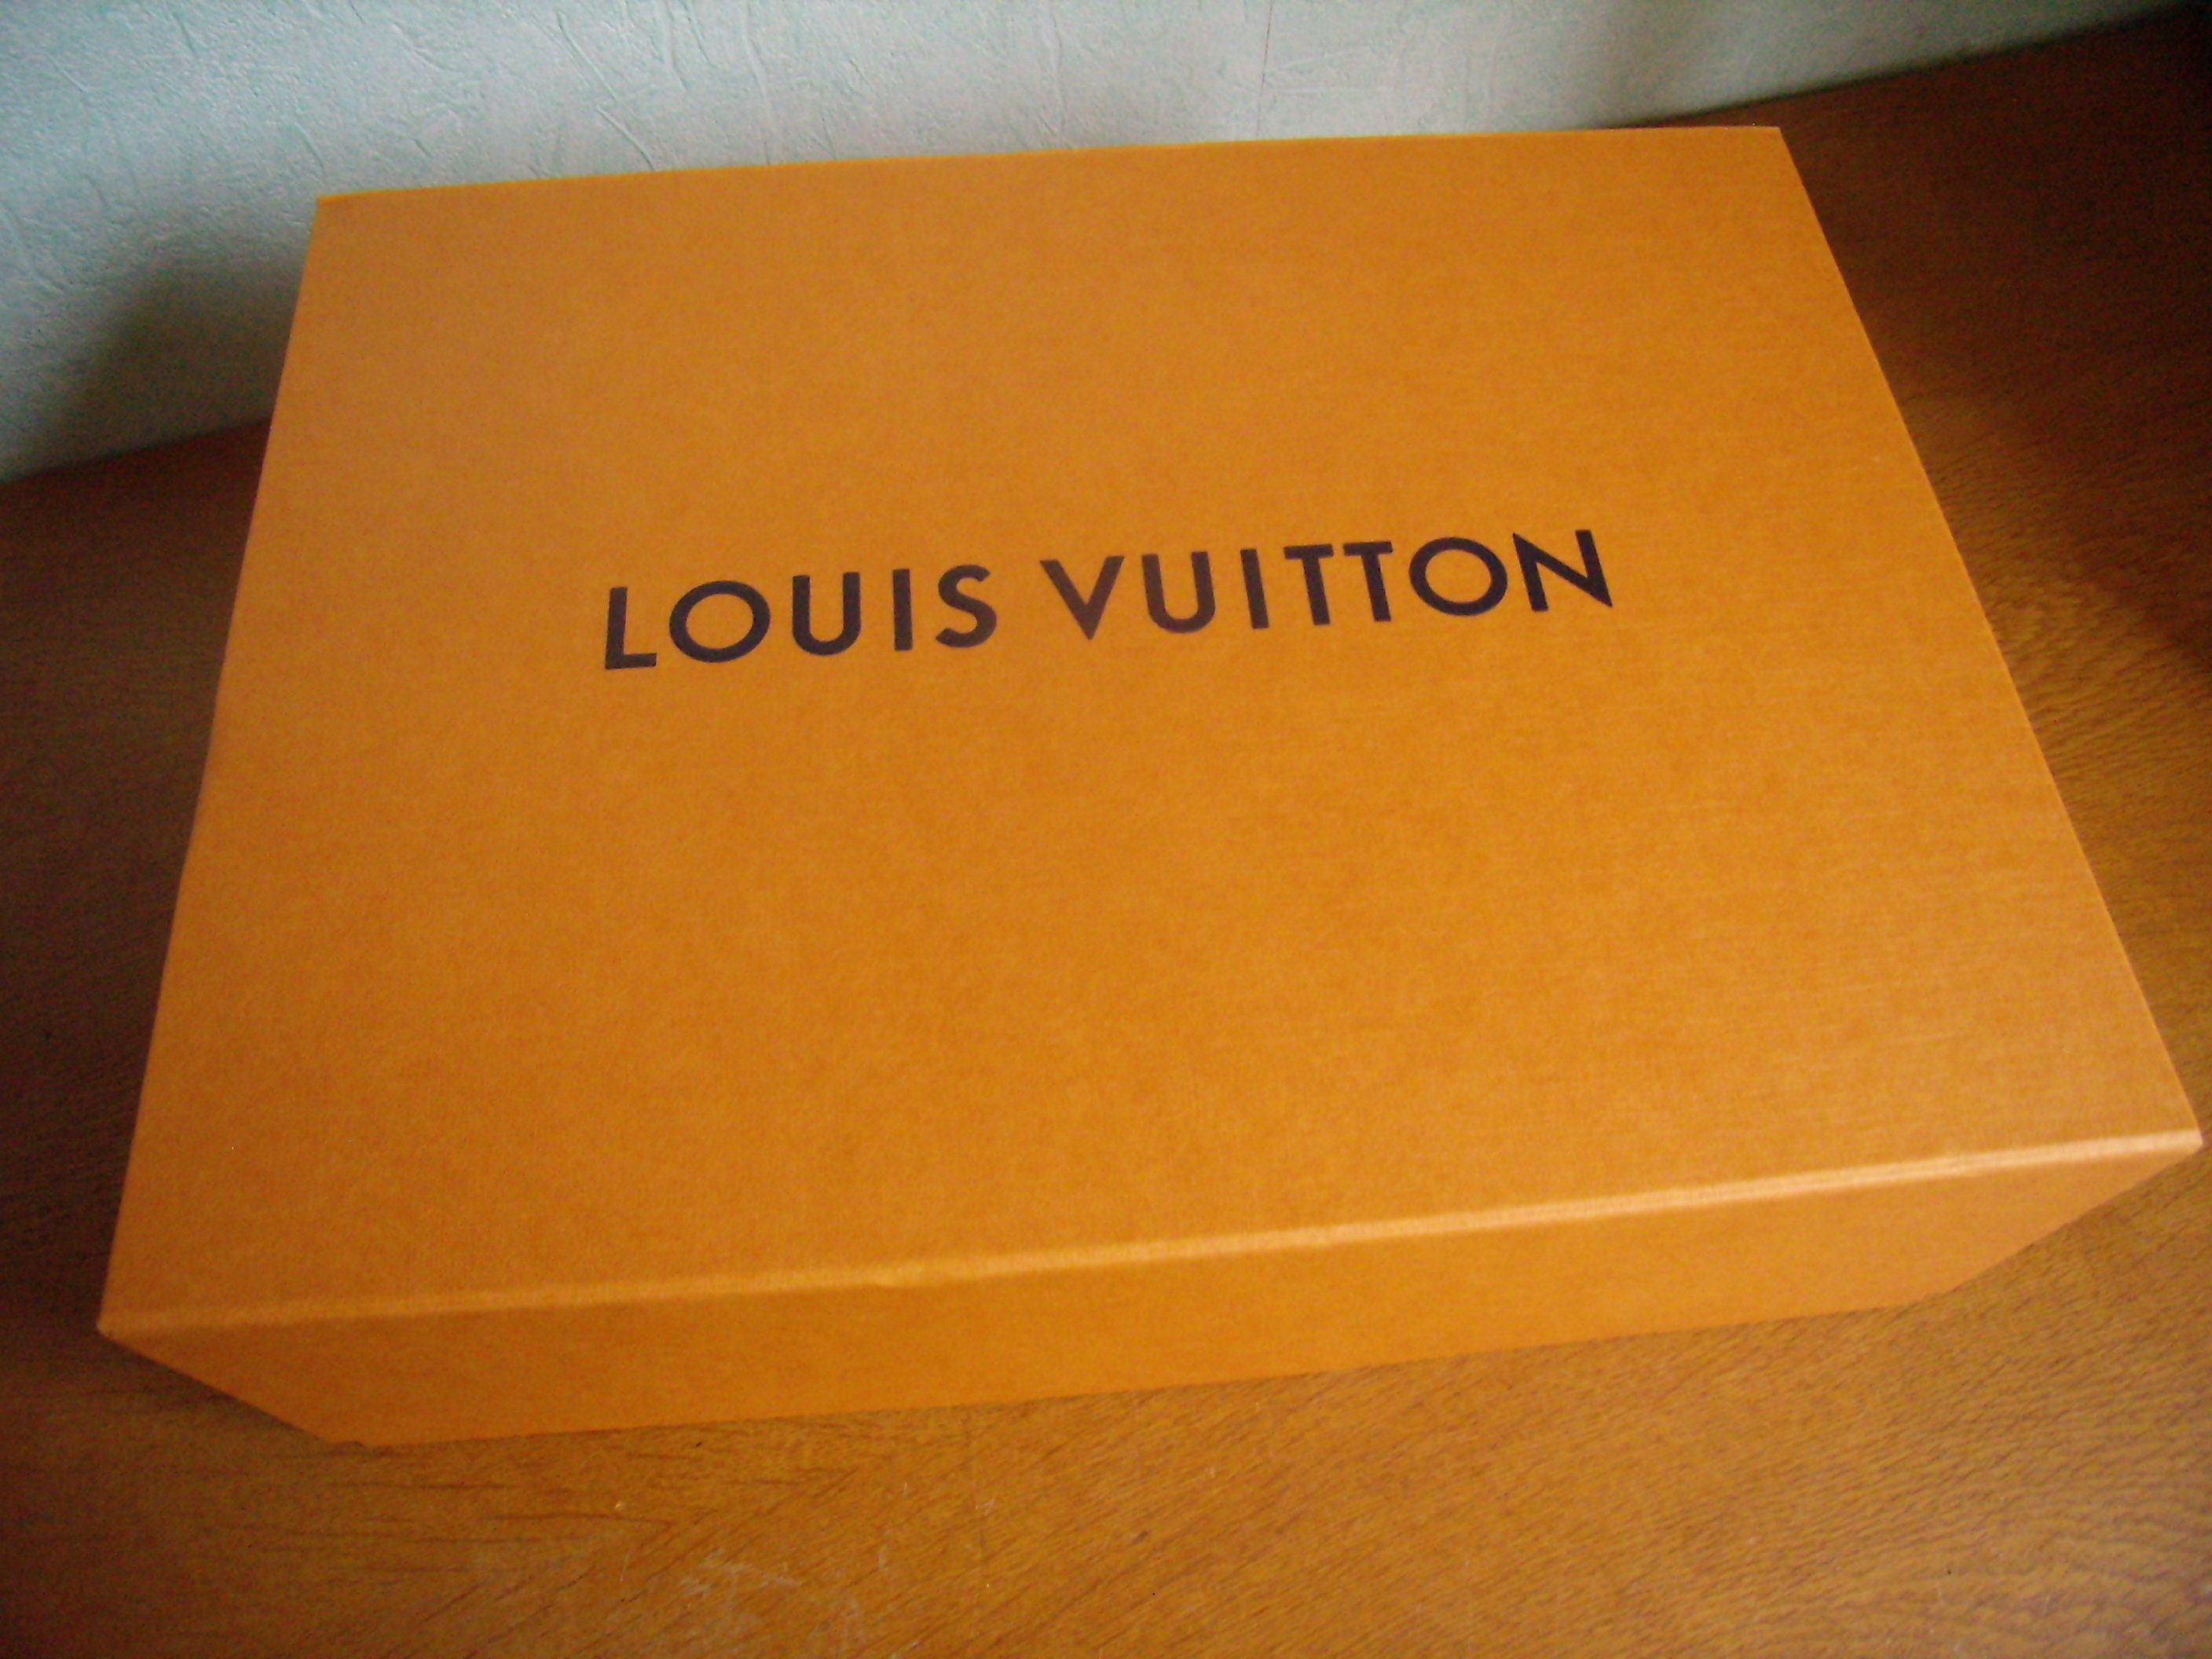 Does anyone know the name of the box a Louis Vuitton product comes in? :  r/PackagingDesign